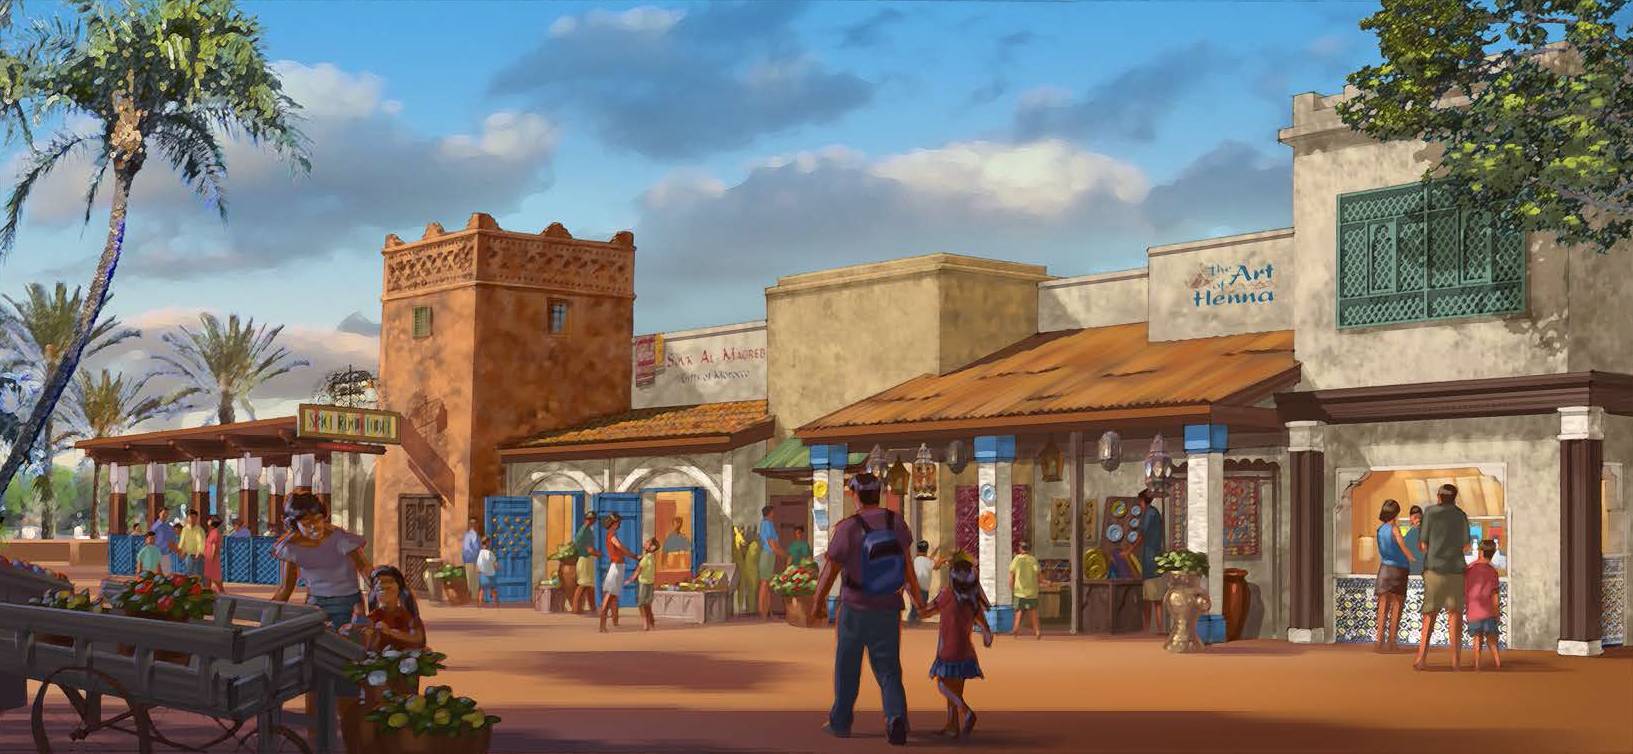 PHOTO - Disney releases more details and concept art for Epcot's Spice Road Table